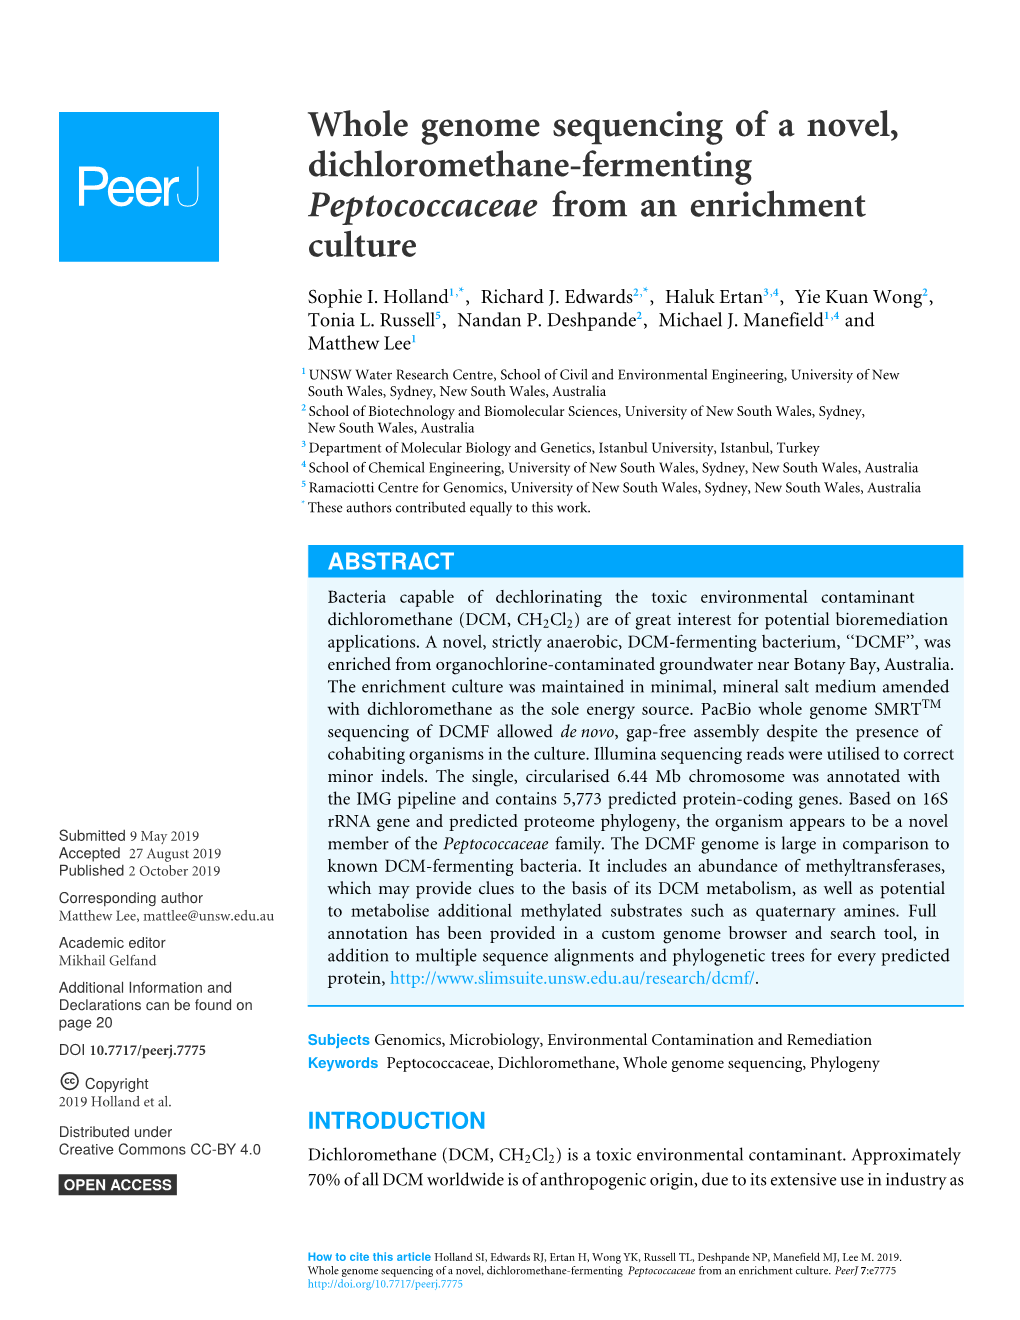 Whole Genome Sequencing of a Novel, Dichloromethane-Fermenting Peptococcaceae from an Enrichment Culture